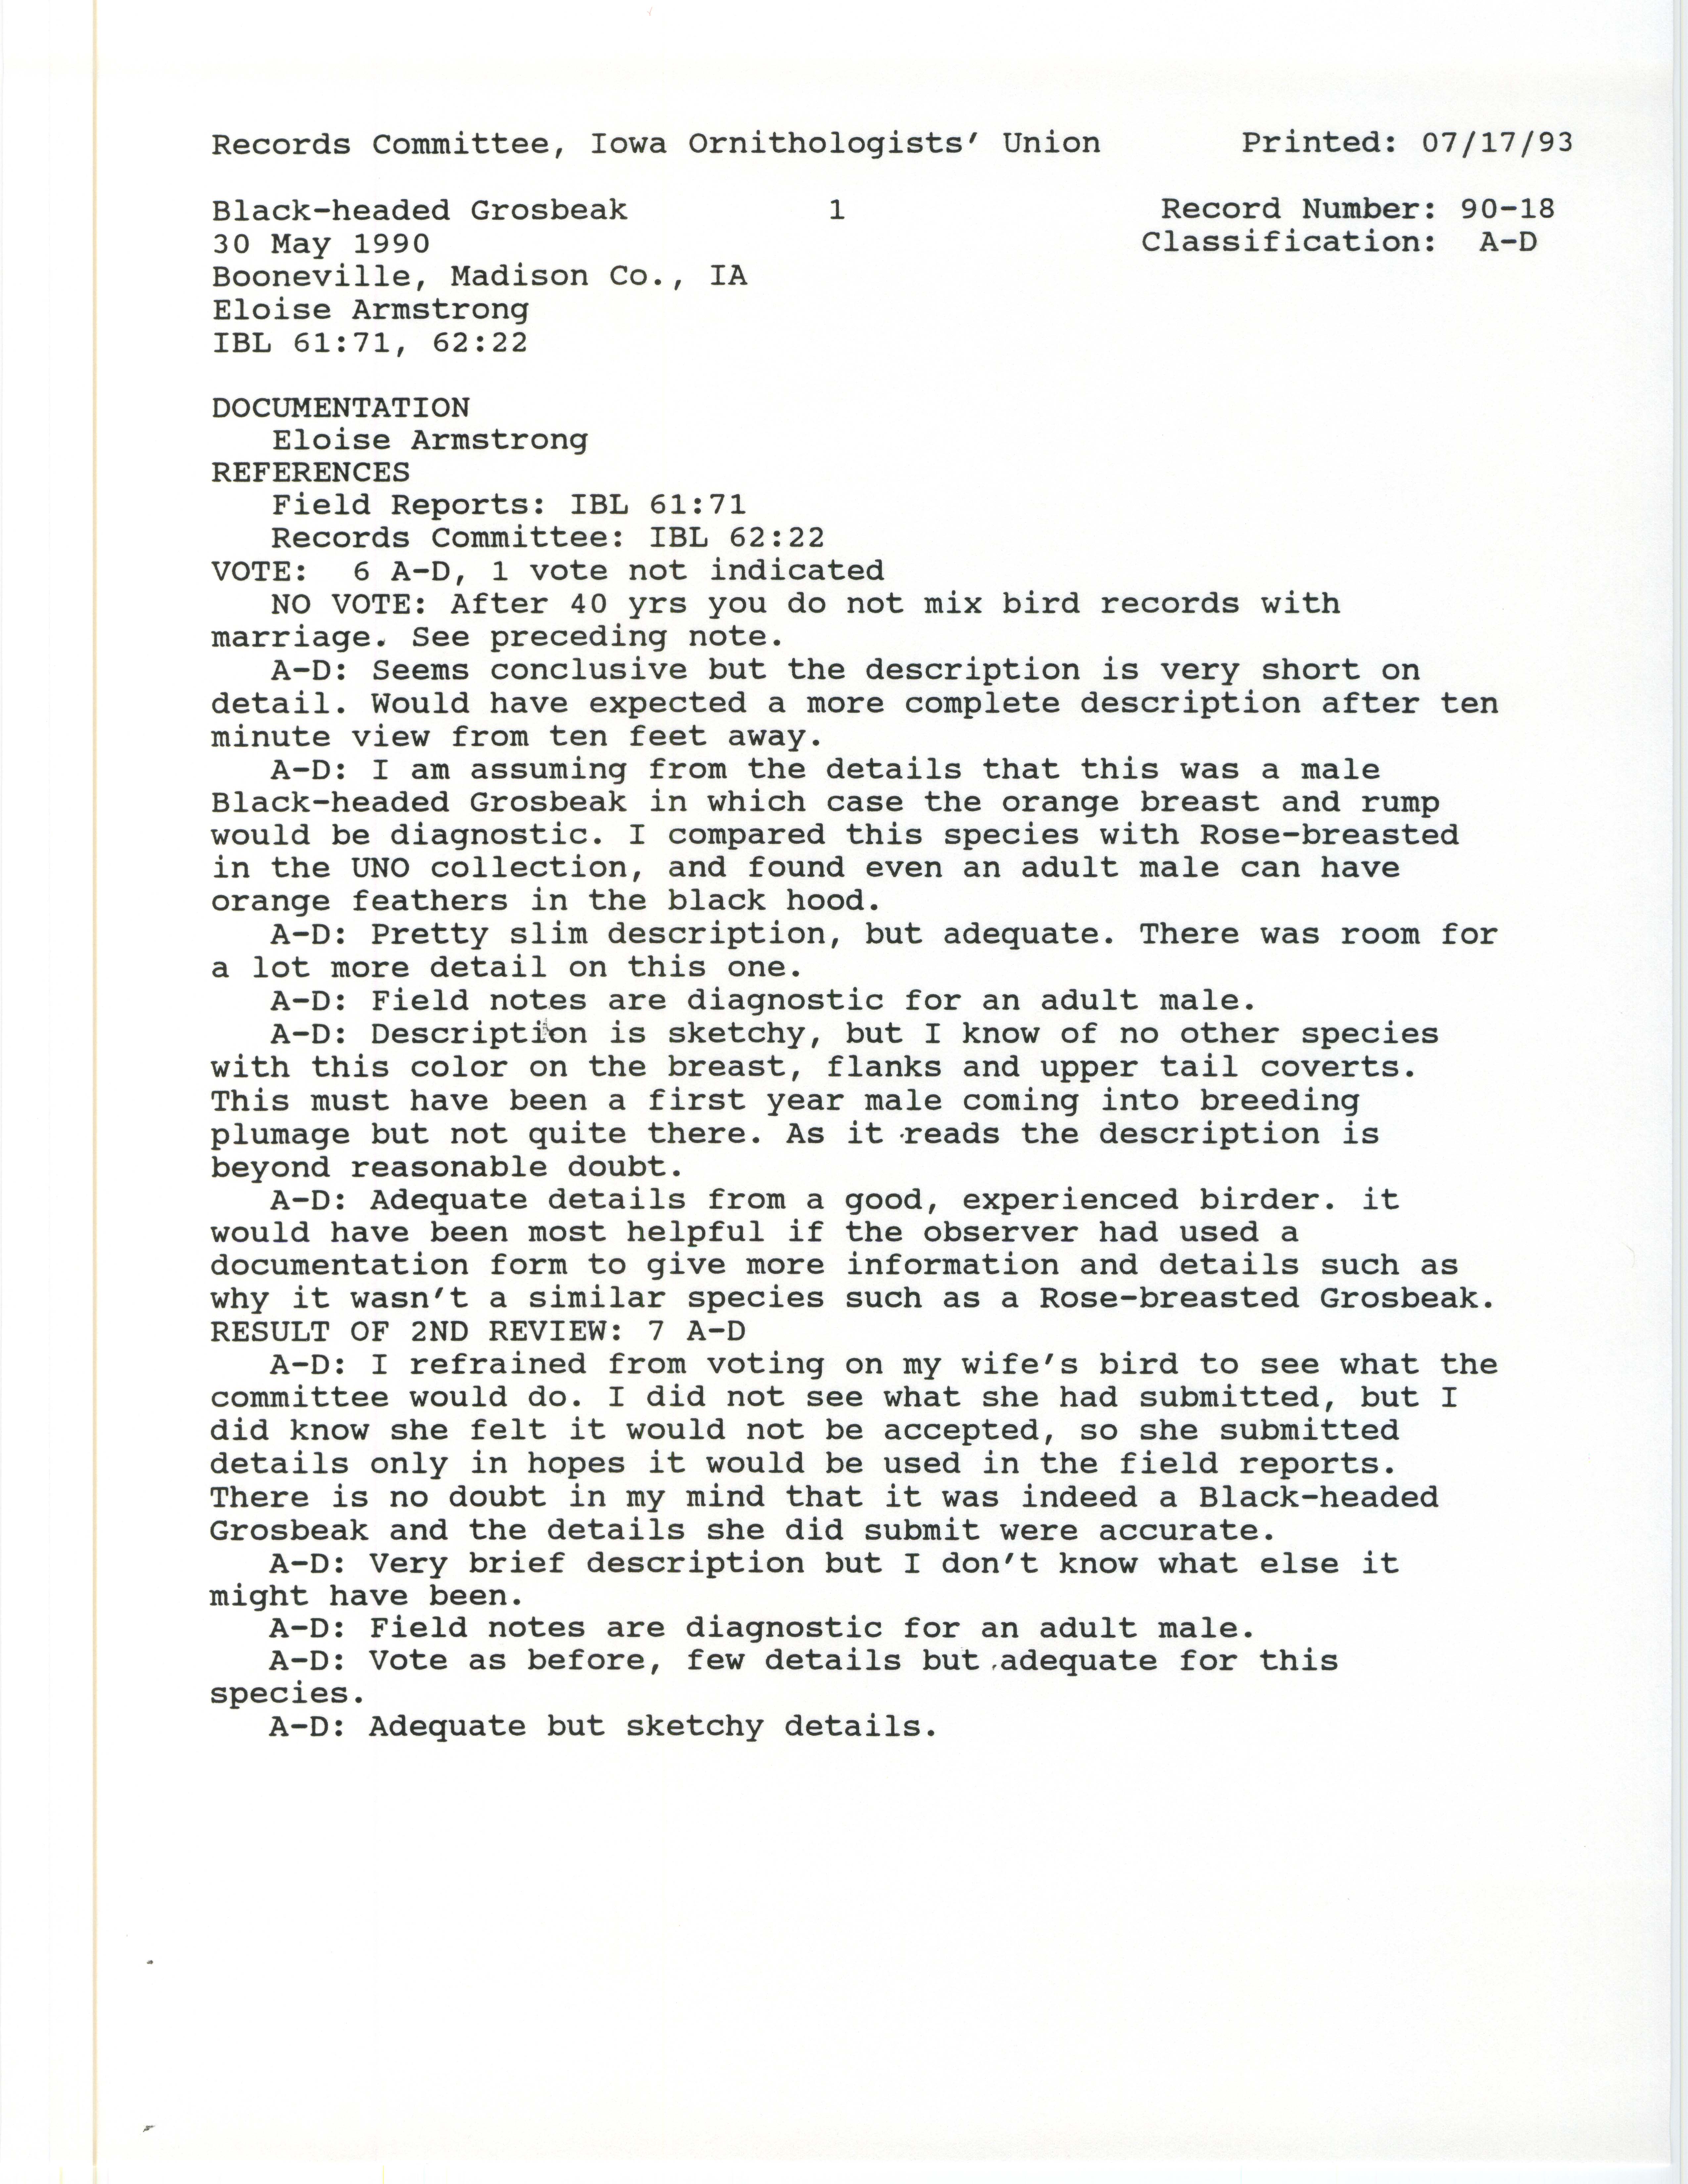 Records Committee review for rare bird sighting for Black-headed Grosbeak at Booneville in 1990